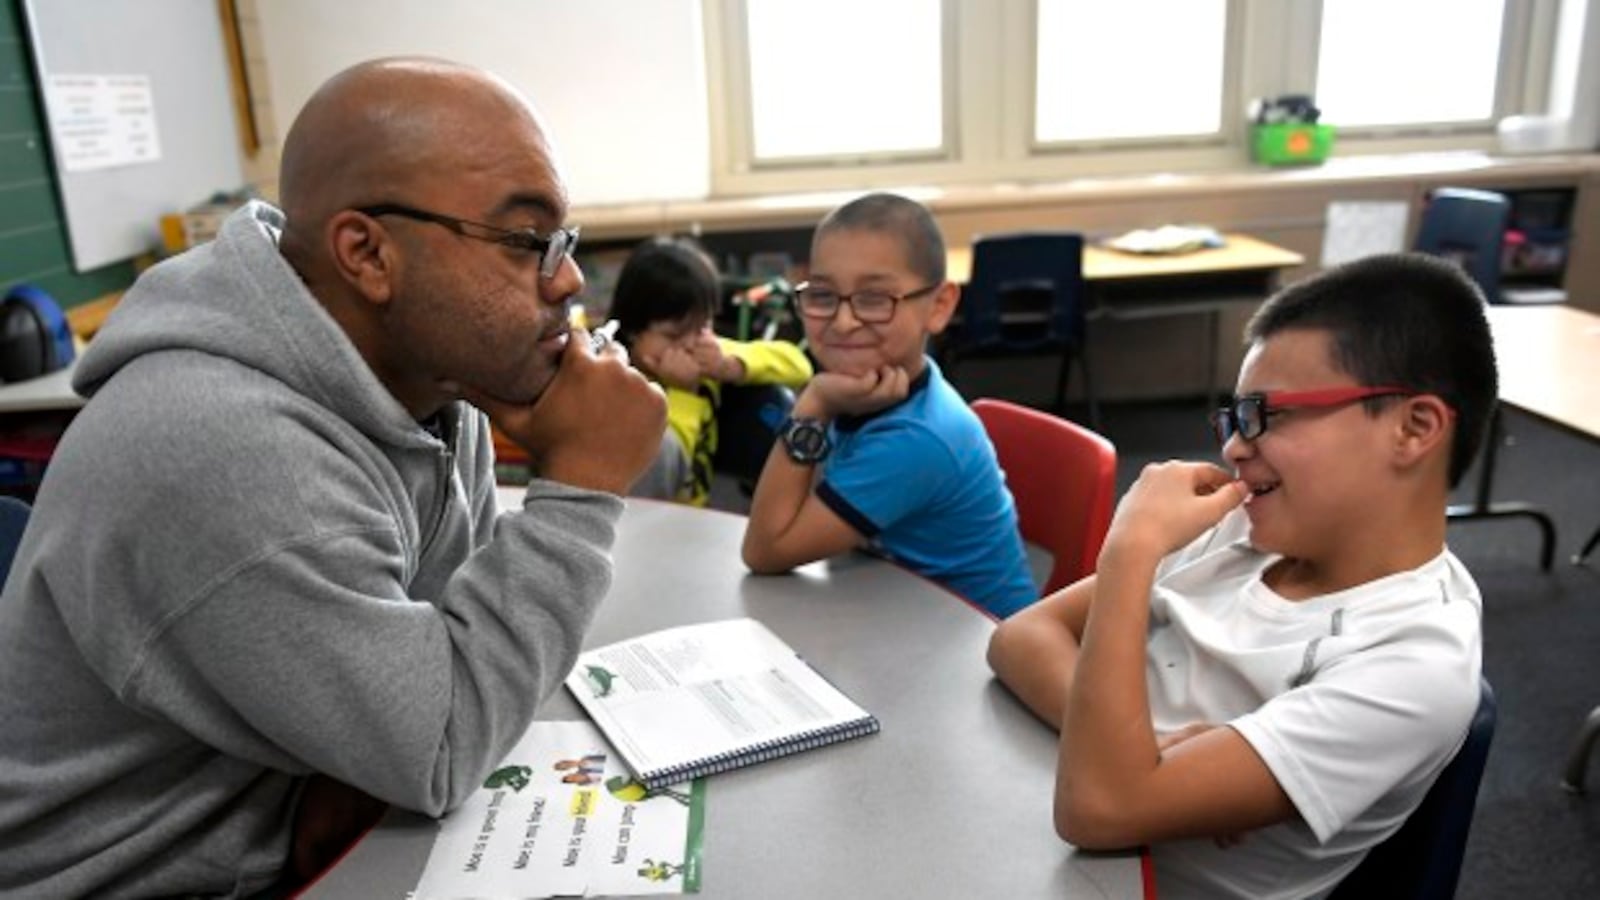 Third grade teacher Quincy Evans waits patiently for an answer from student Jonathan Bueno at Denver’s Fairview Elementary on Jan. 23, 2019.